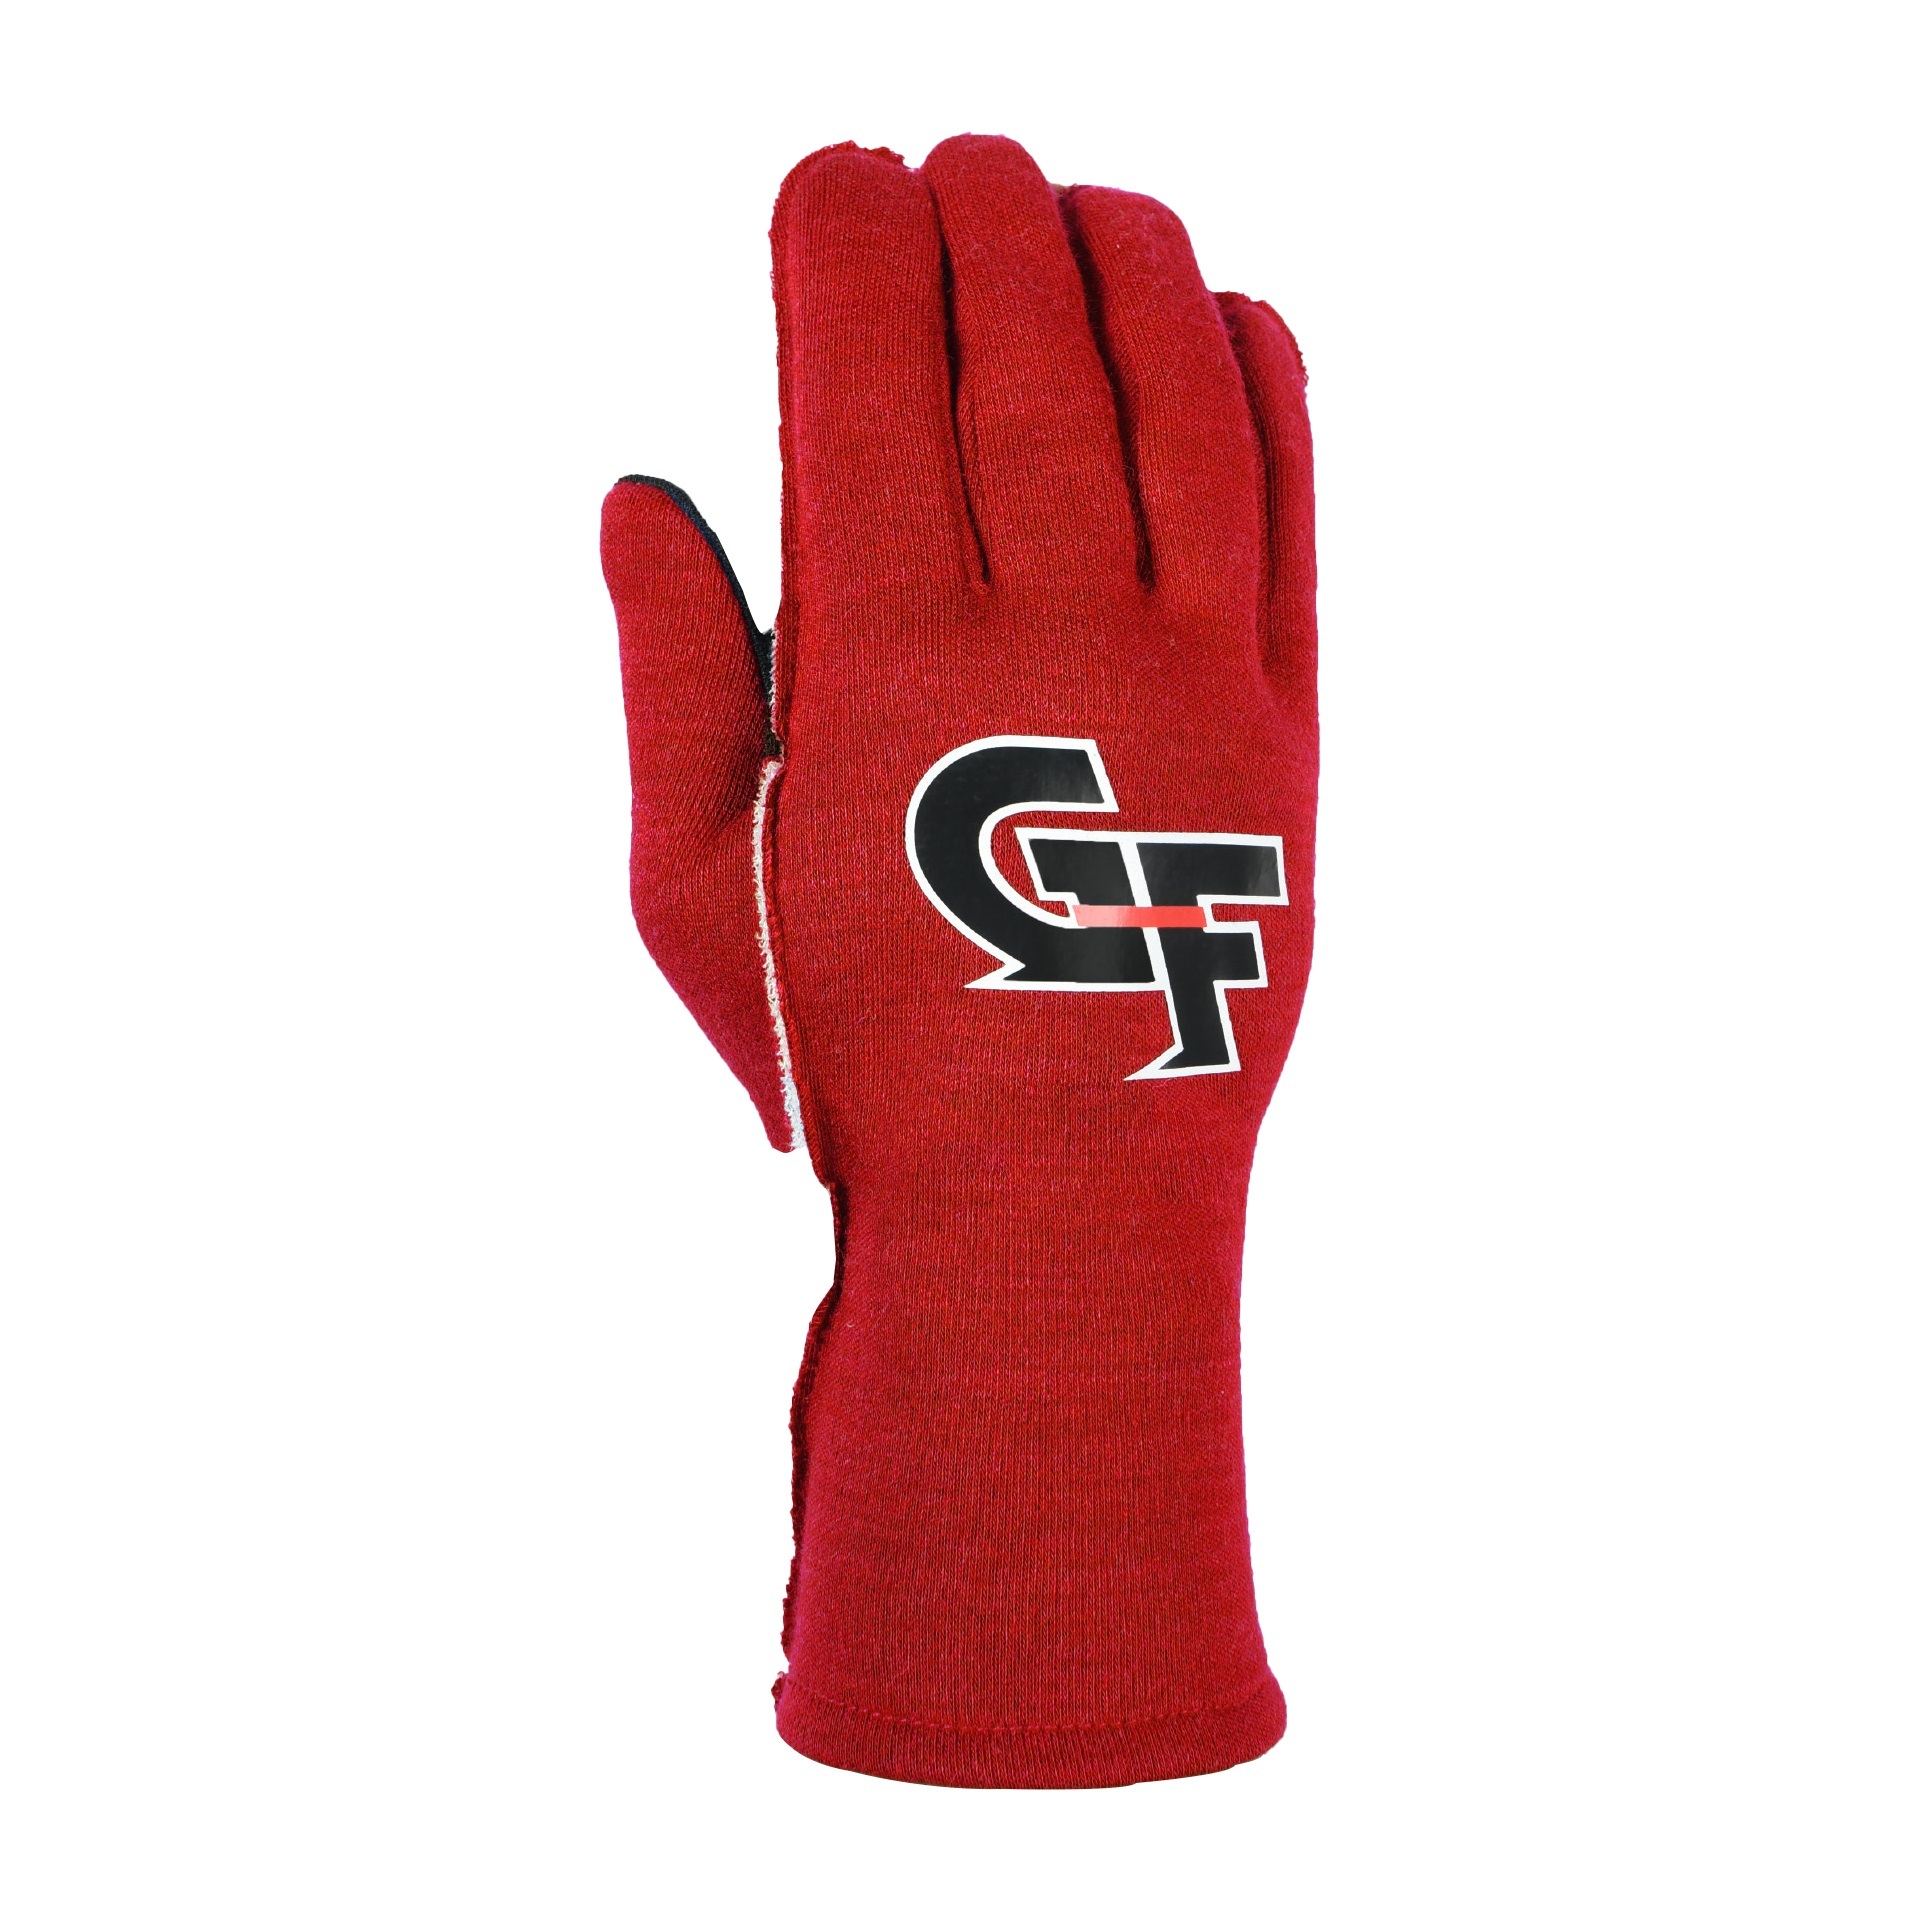 G-FORCE Gloves G-Limit Large Red